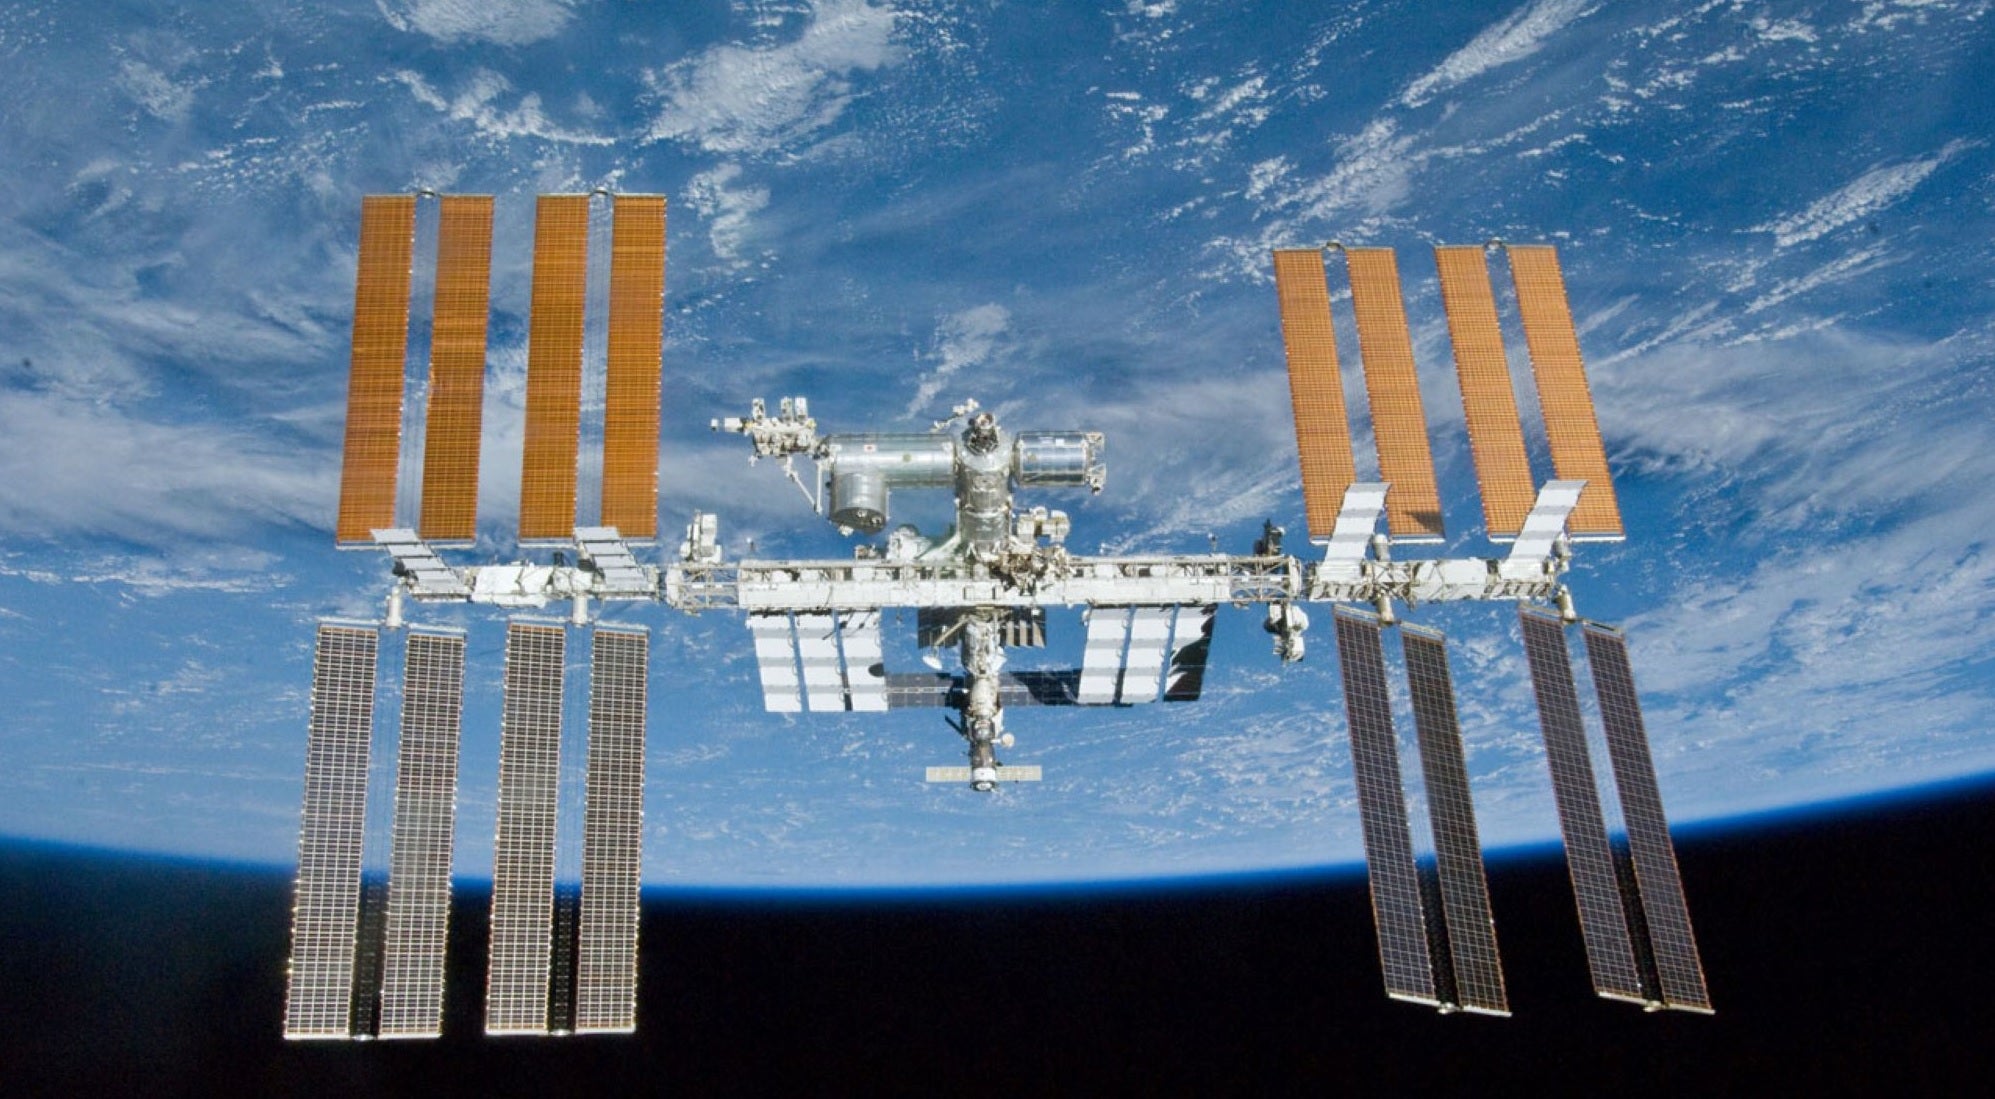 ISS astronauts are building objects that couldn’t exist on Earth